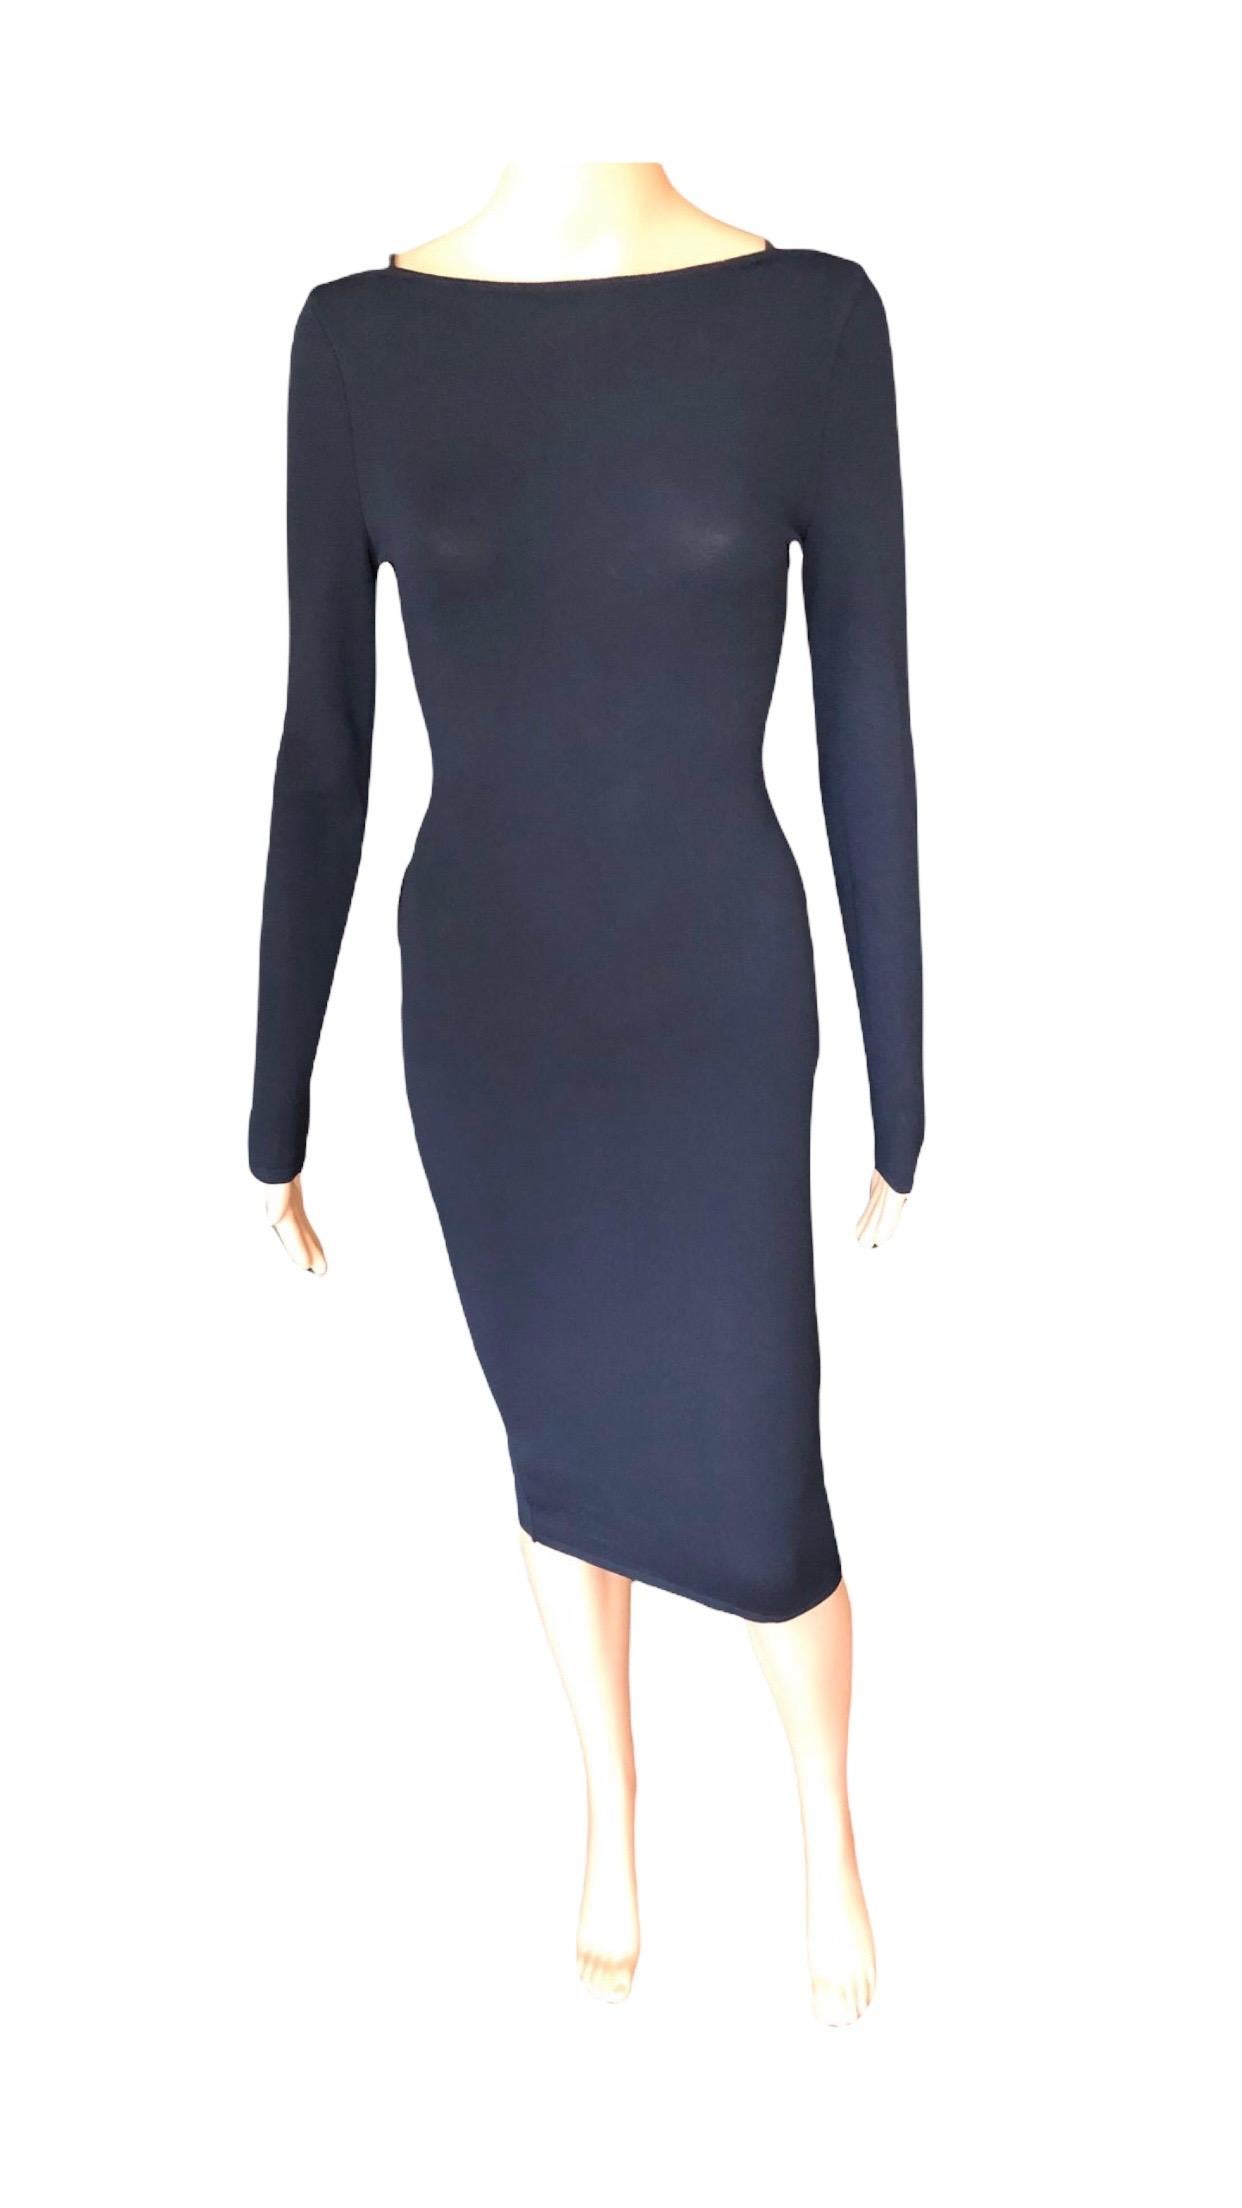 Tom Ford for Gucci S/S 1998 Vintage Bodycon Knit Midi Dress 5